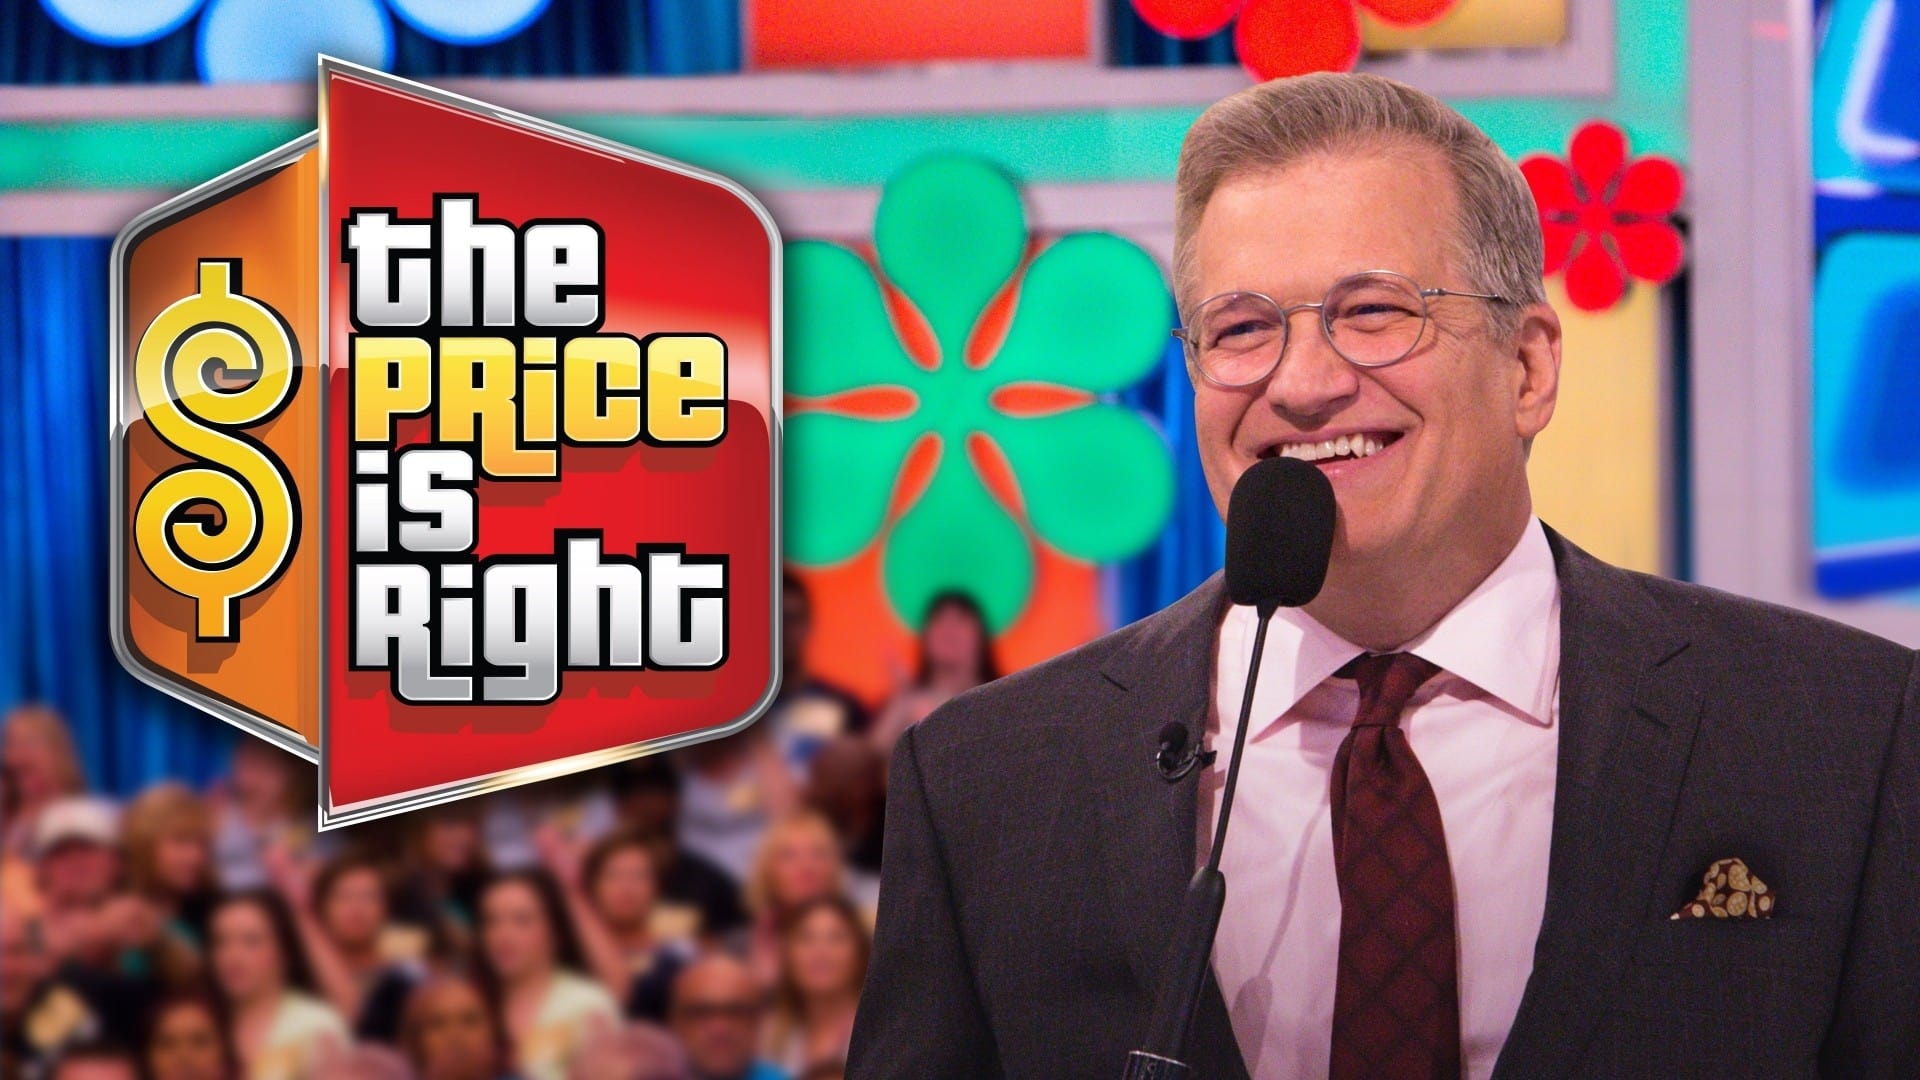 The Price Is Right - Season 1 Episode 40 : The Price Is Right Season 1 Episode 40